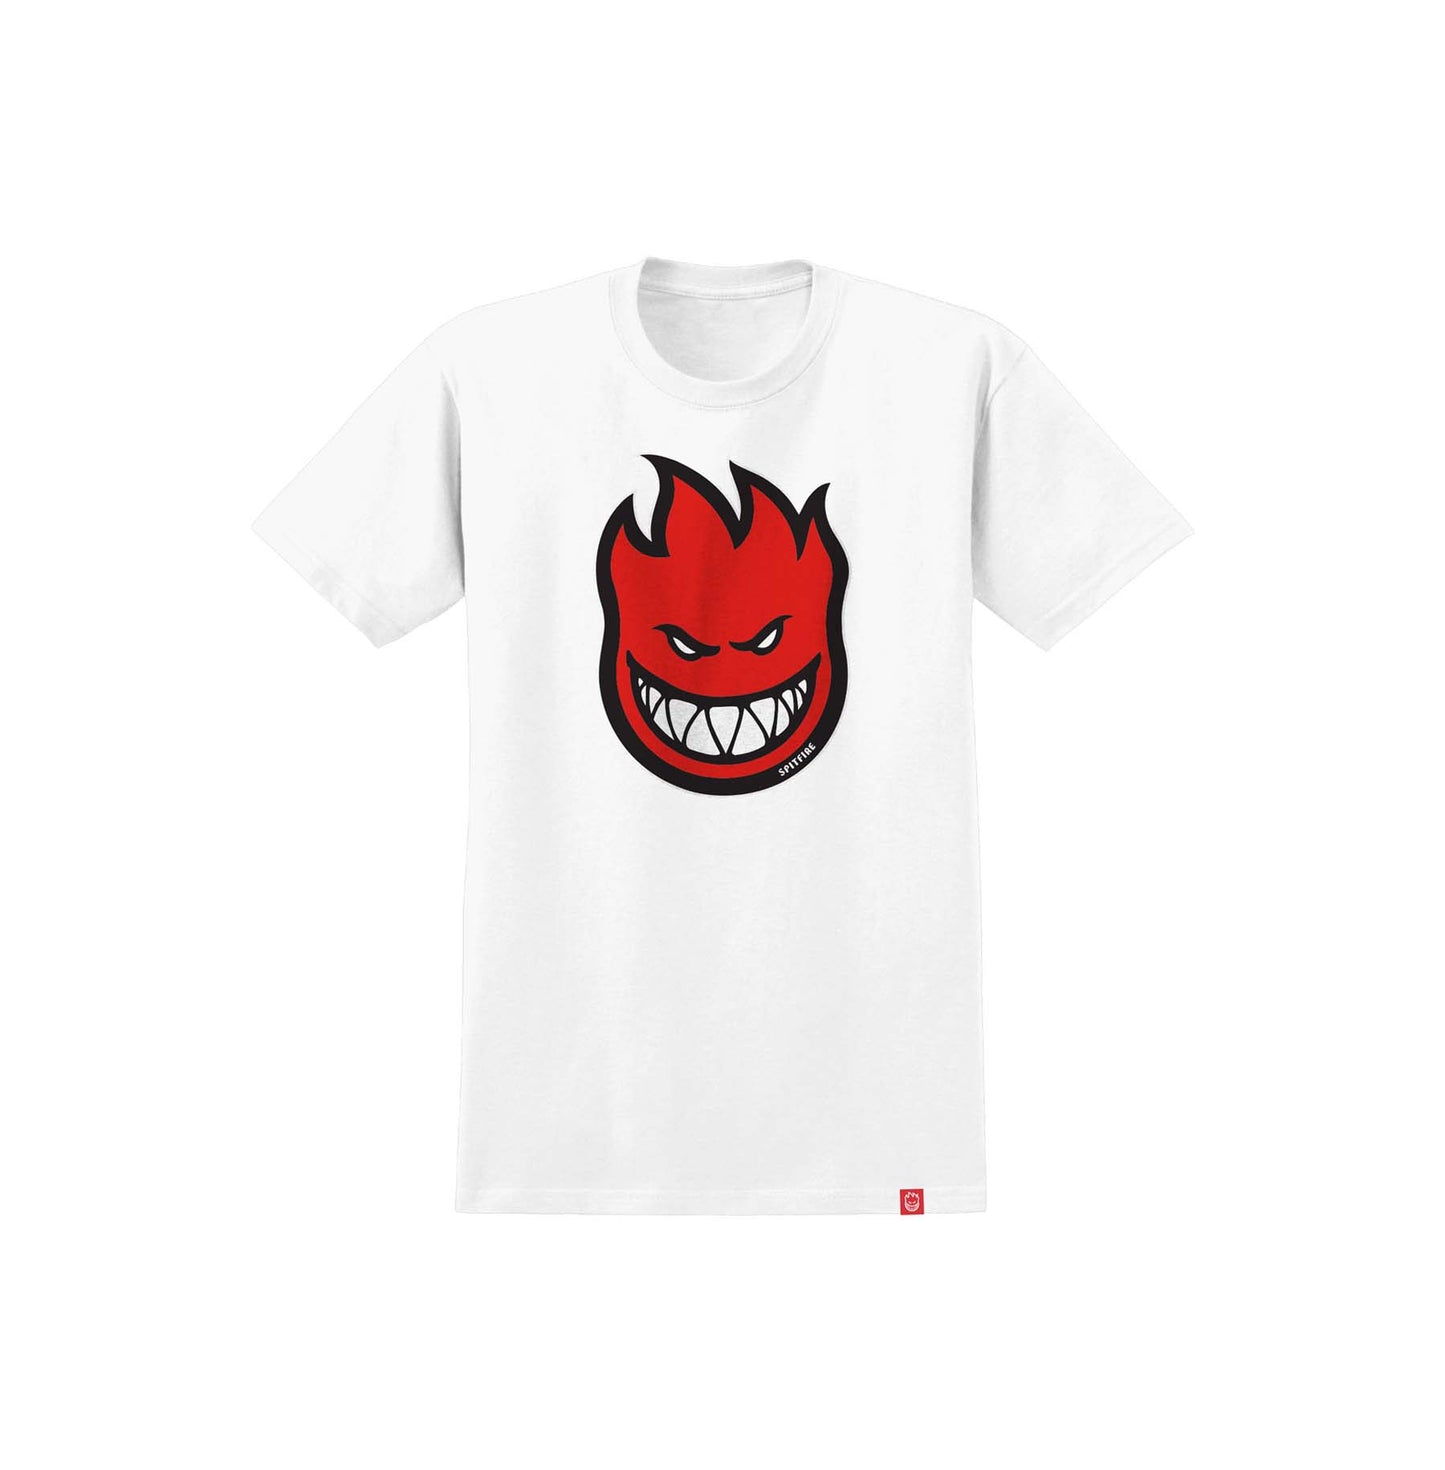 SPITFIRE - BIGHEAD FILL TEE - WHITE/RED - YOUTH SIZE